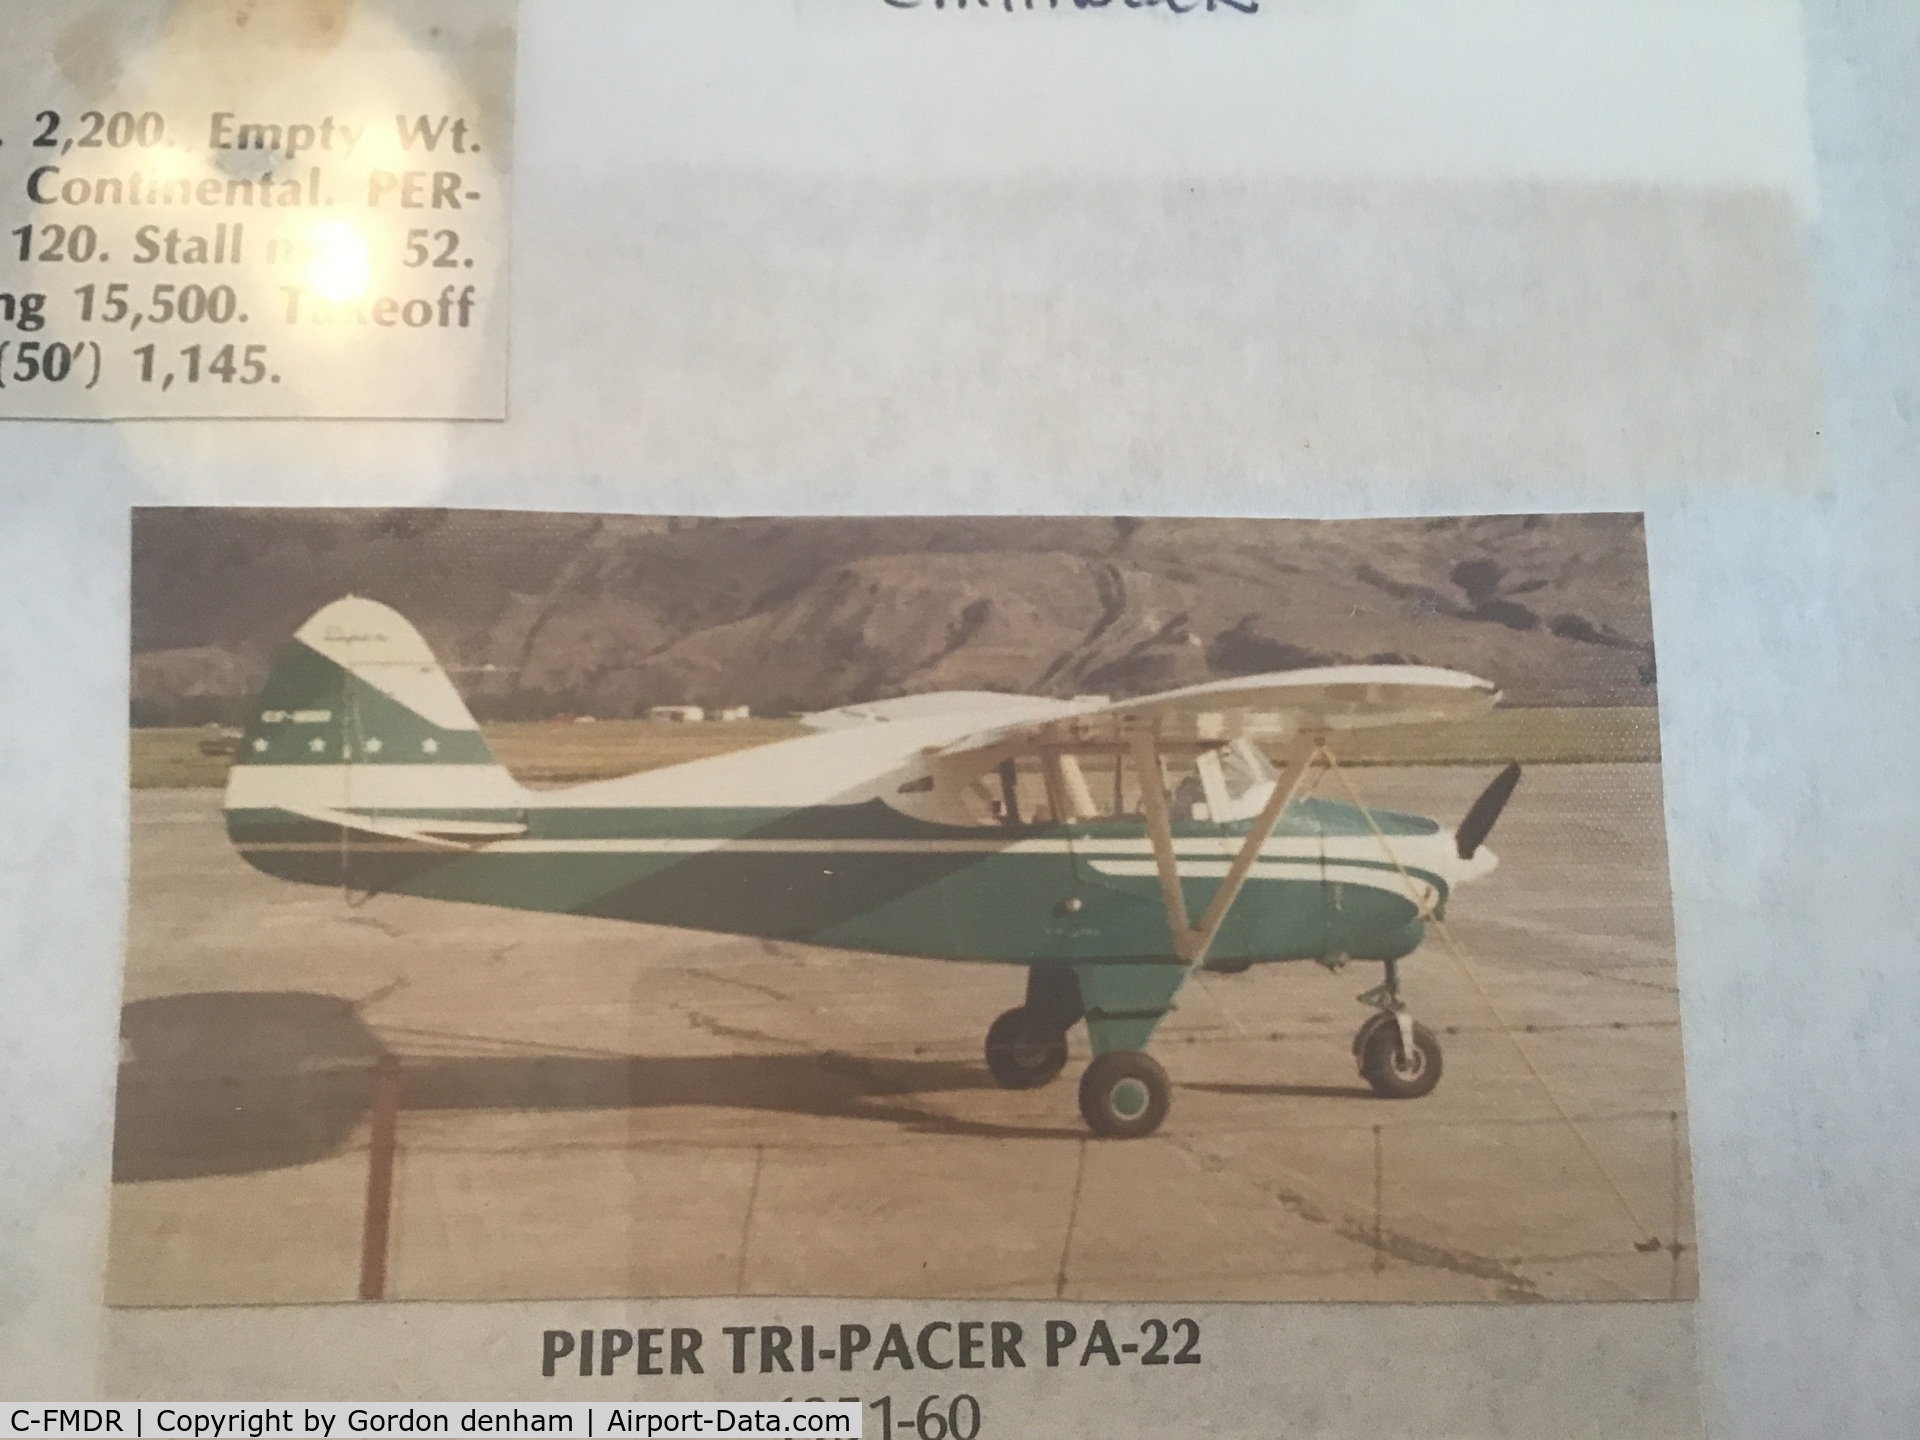 C-FMDR, 1960 Piper PA-22-160X Tri Pacer C/N 22-7539X, Flew this back in 1967